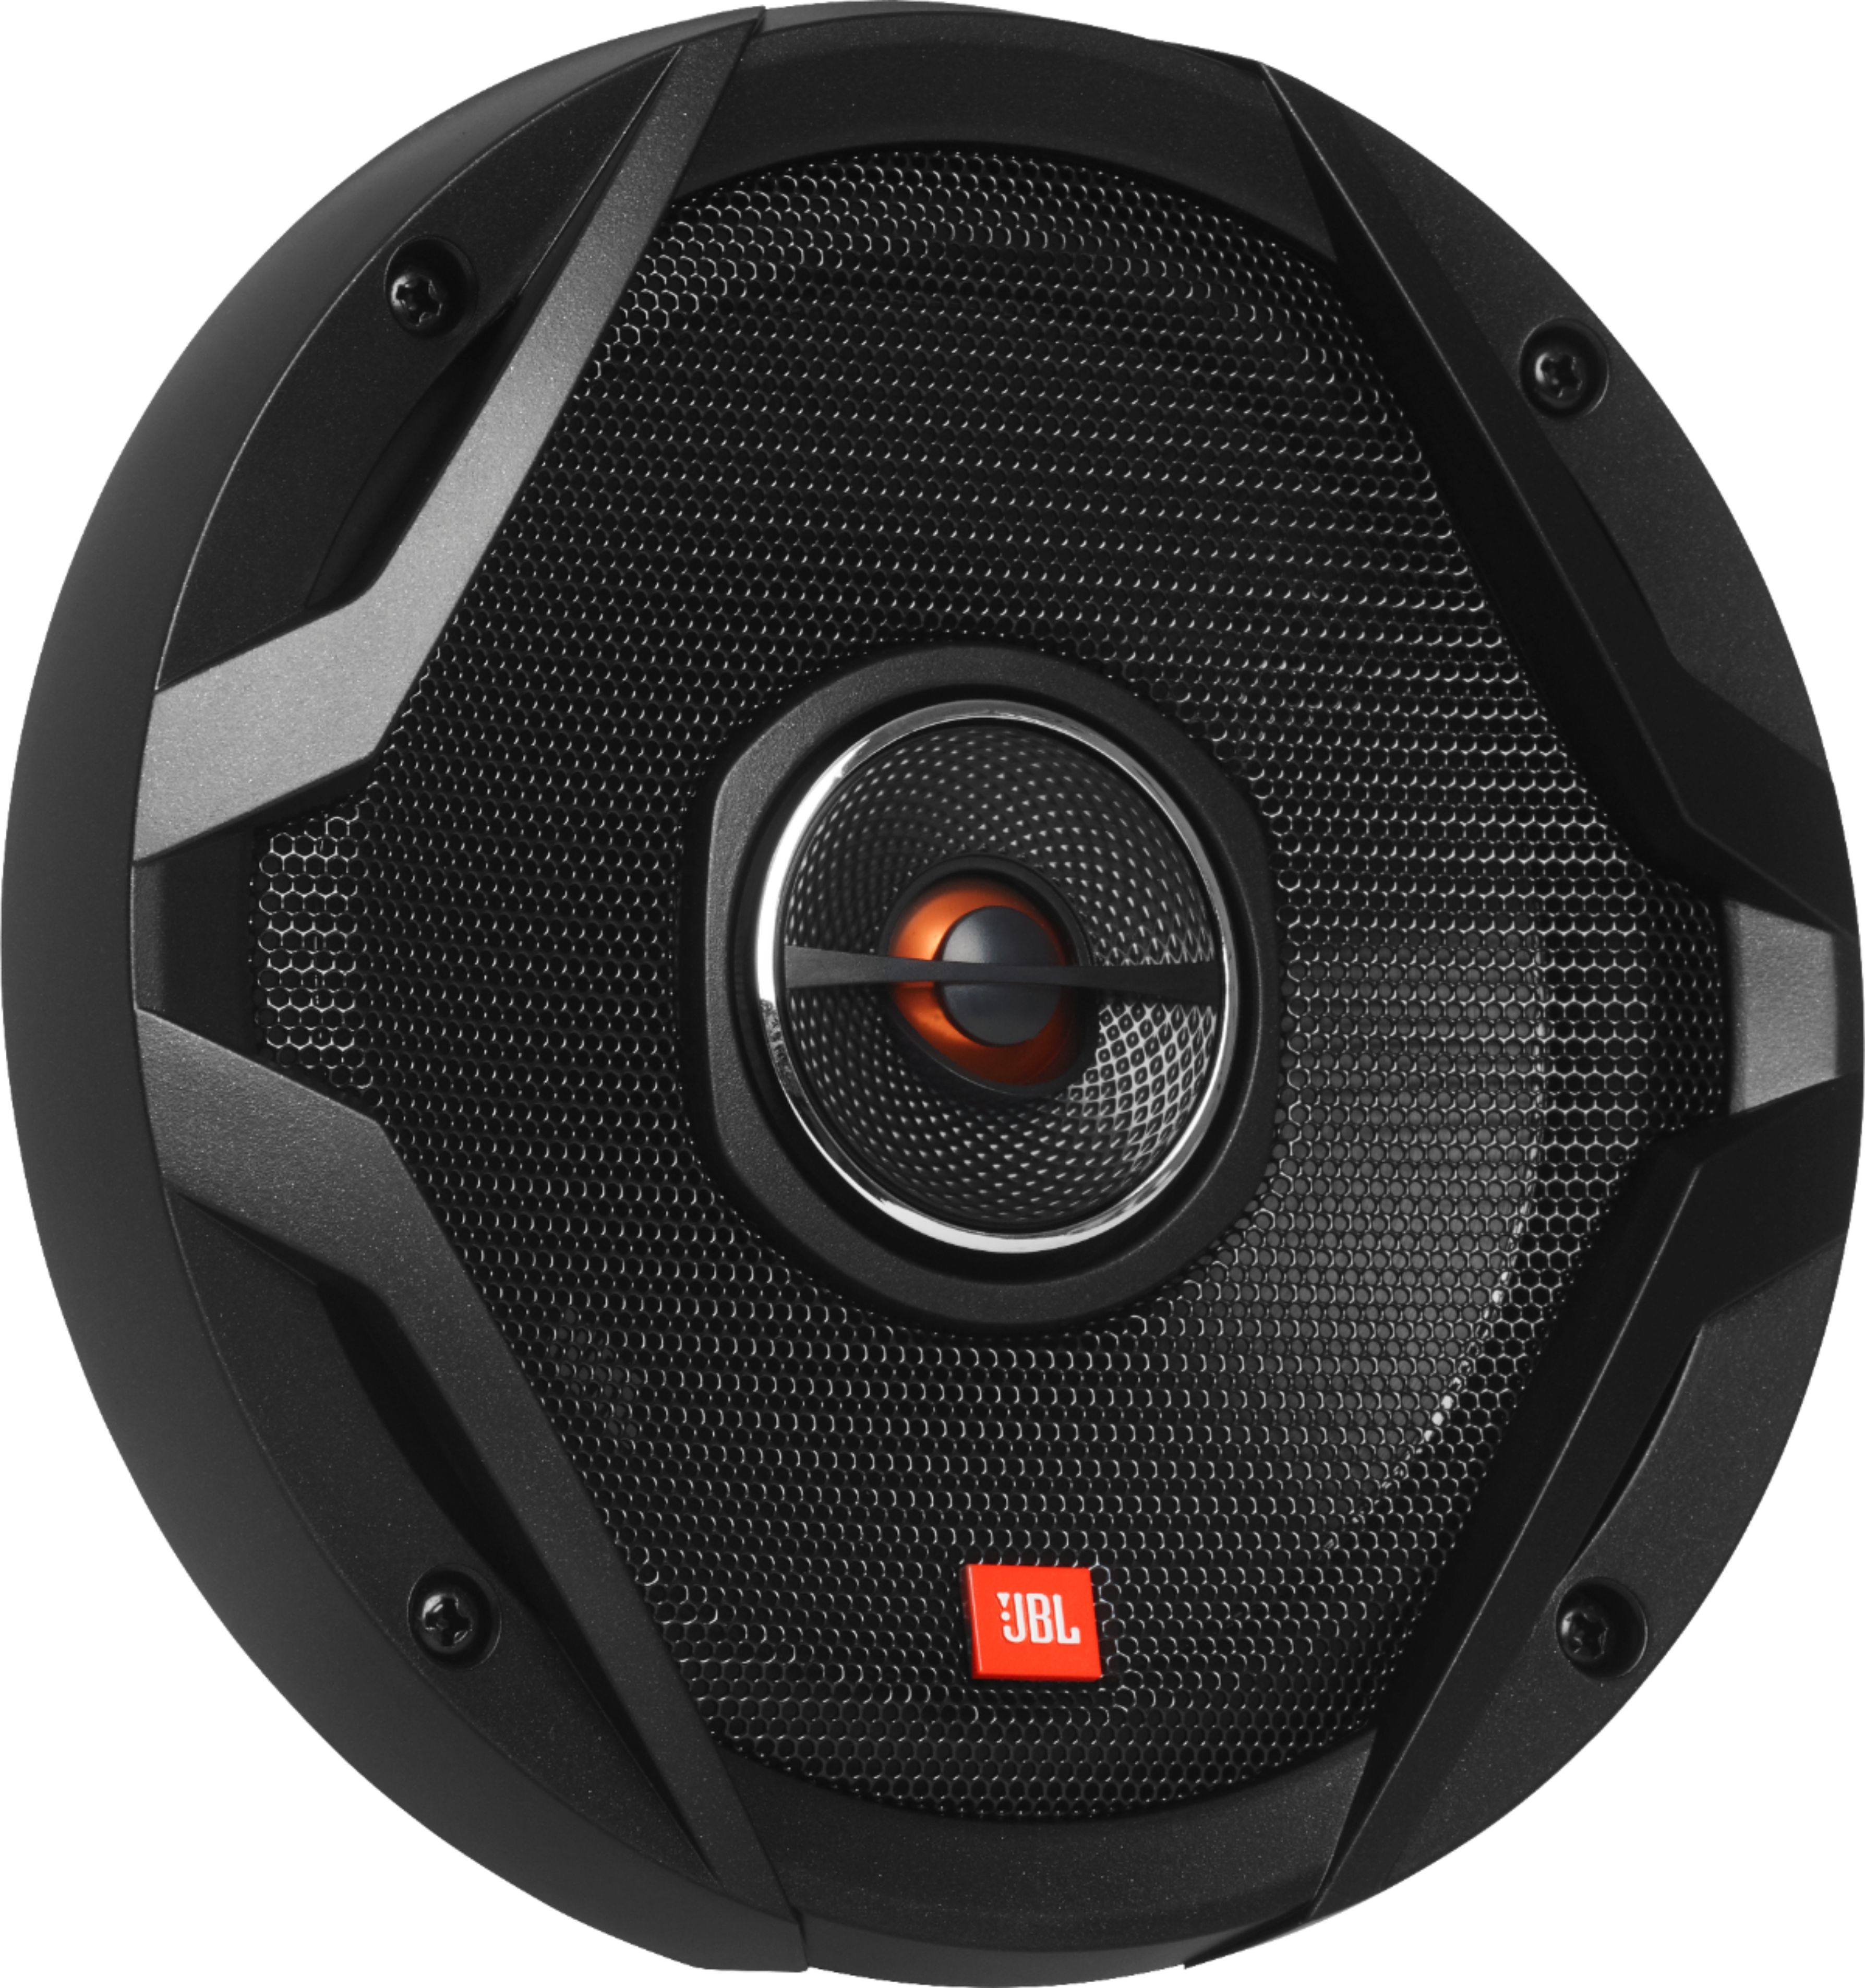 Angle View: JBL - GX Series 6.5" 2-Way Coaxial Car Loudspeakers with Polypropylene Cones (Pair) - Black